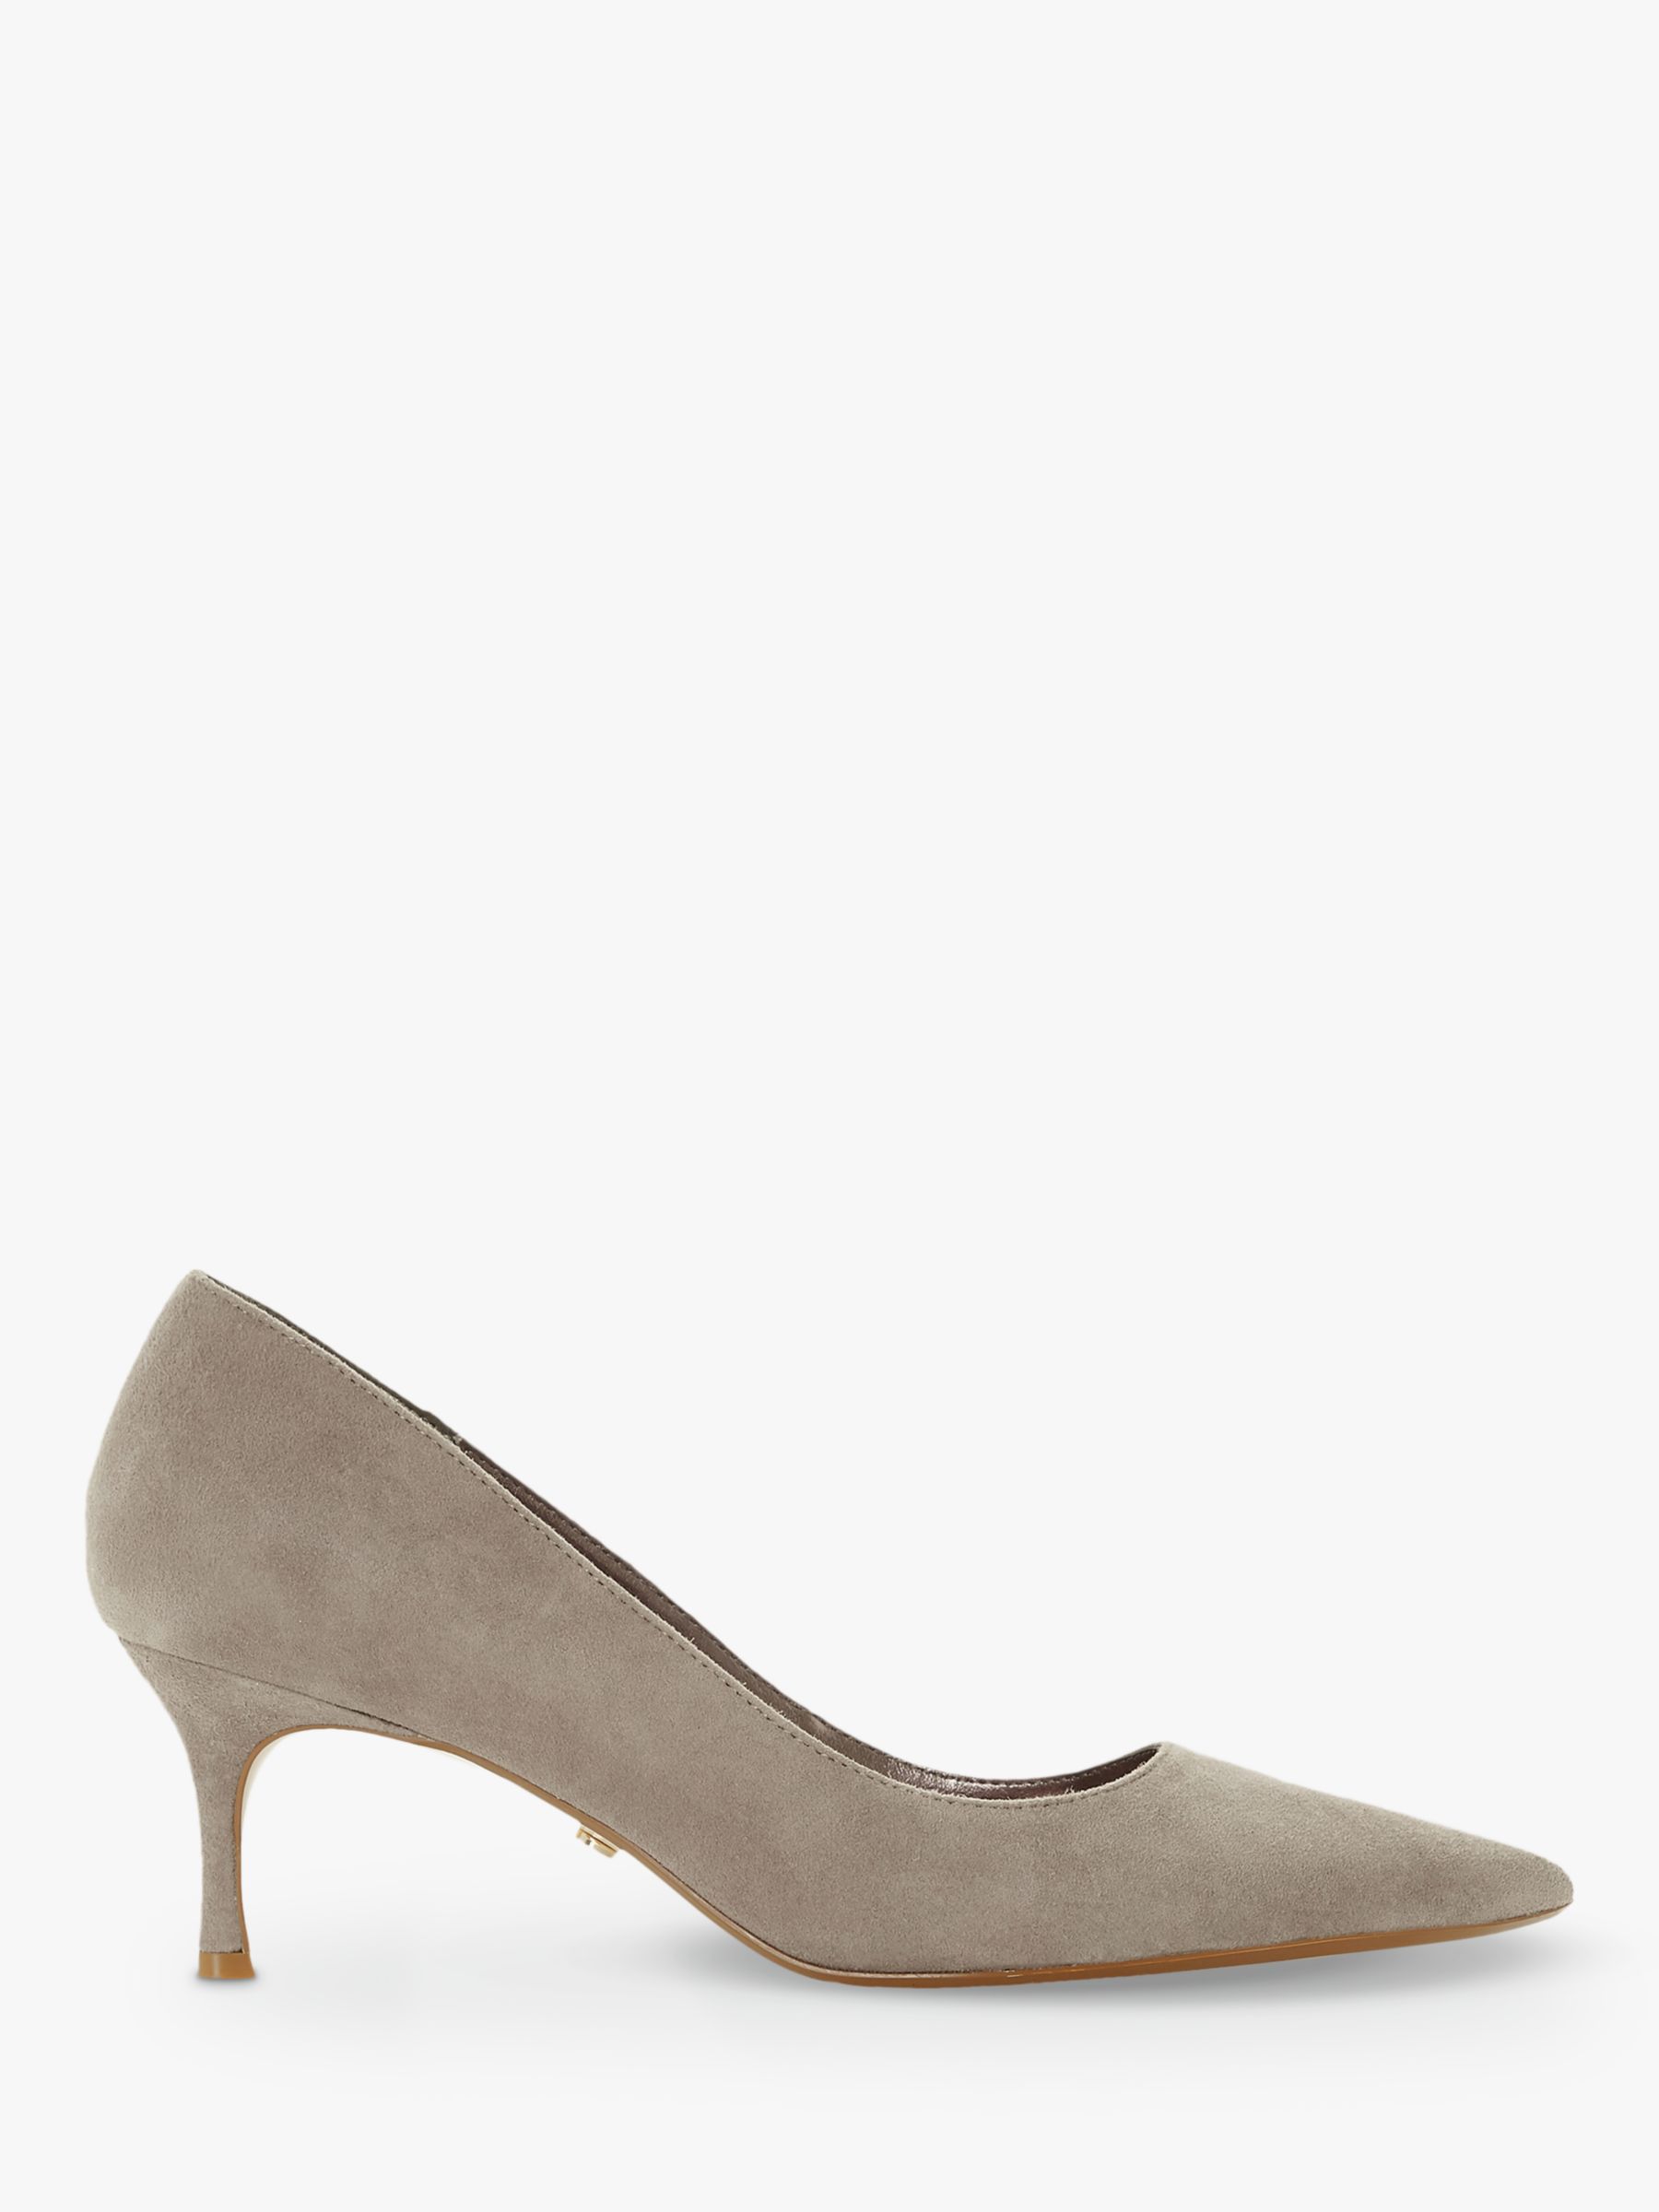 Dune Astley Pointed Toe Court Shoes, Taupe Suede, 4